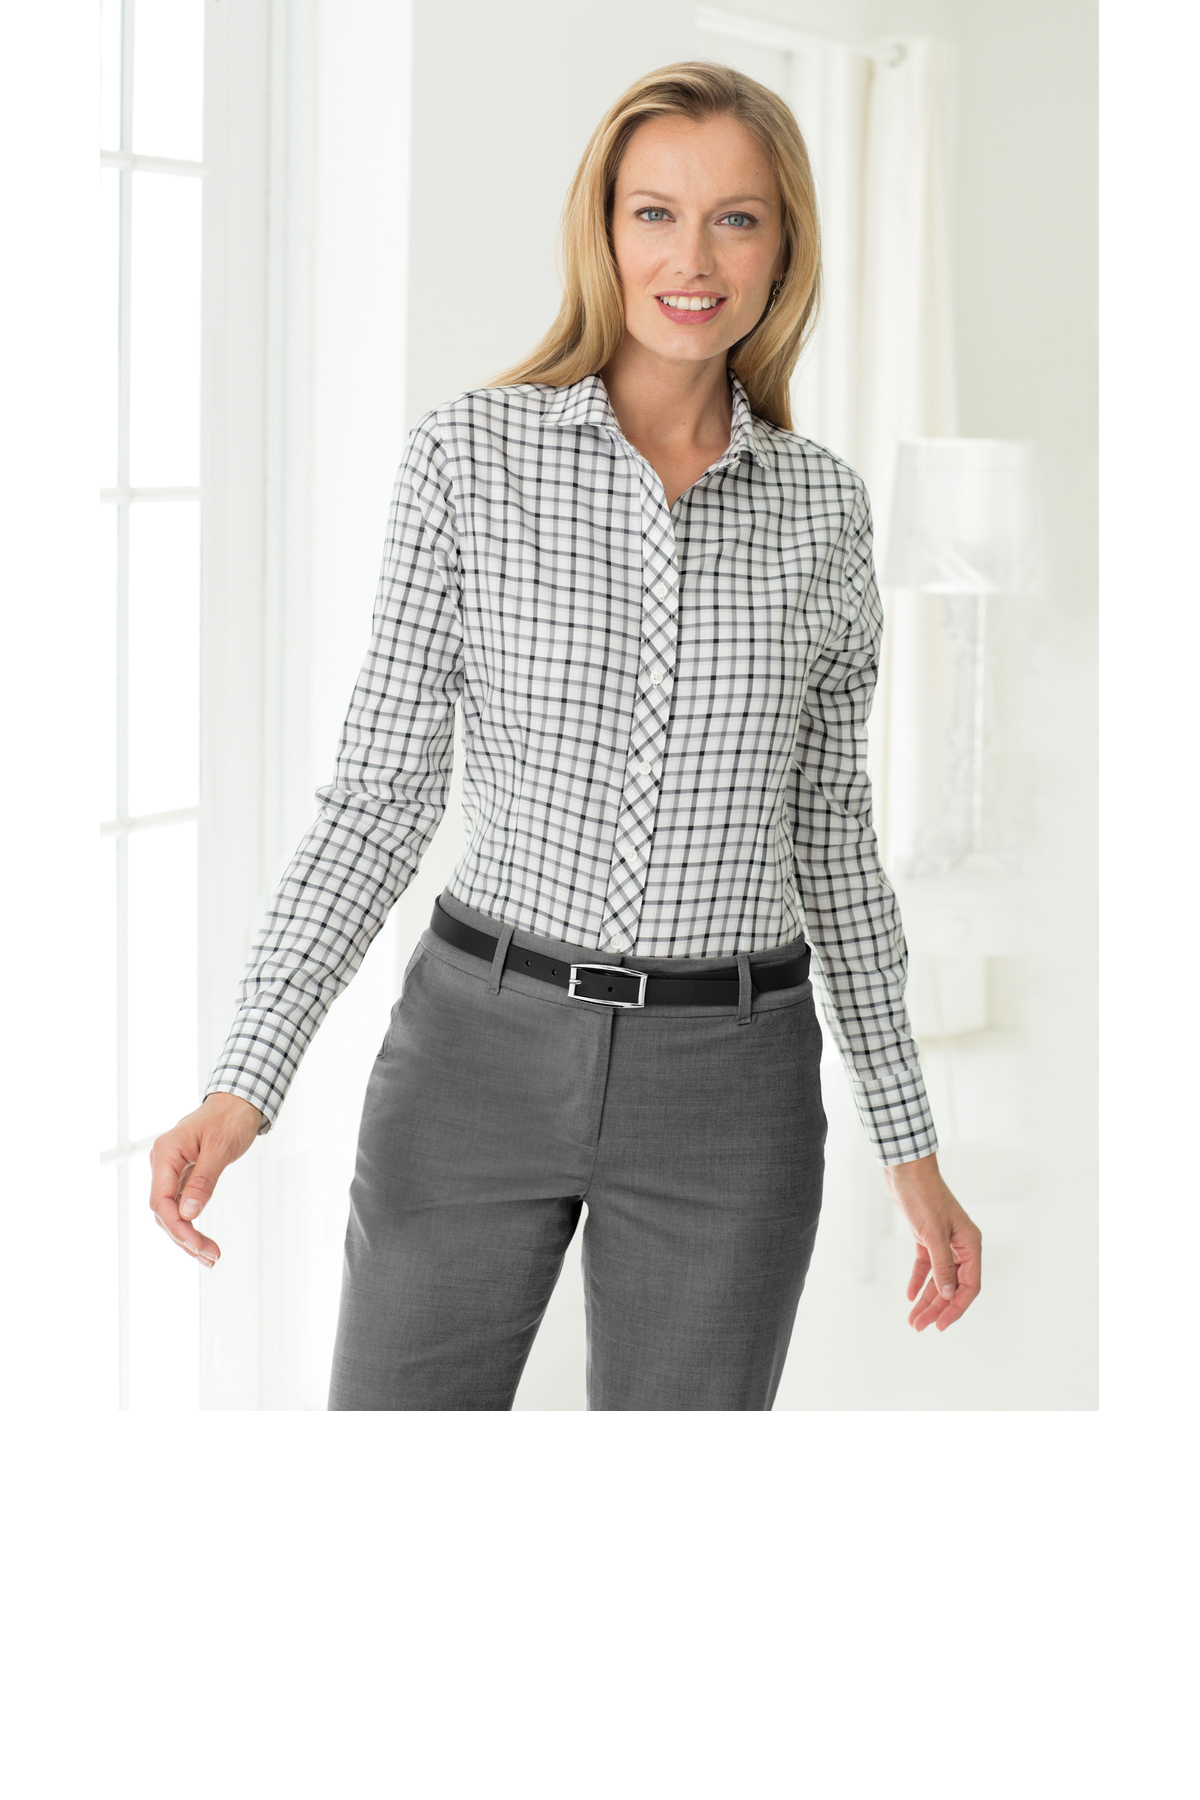 Red House Ladies Tricolor Check Non-Iron Shirt | Product | SanMar